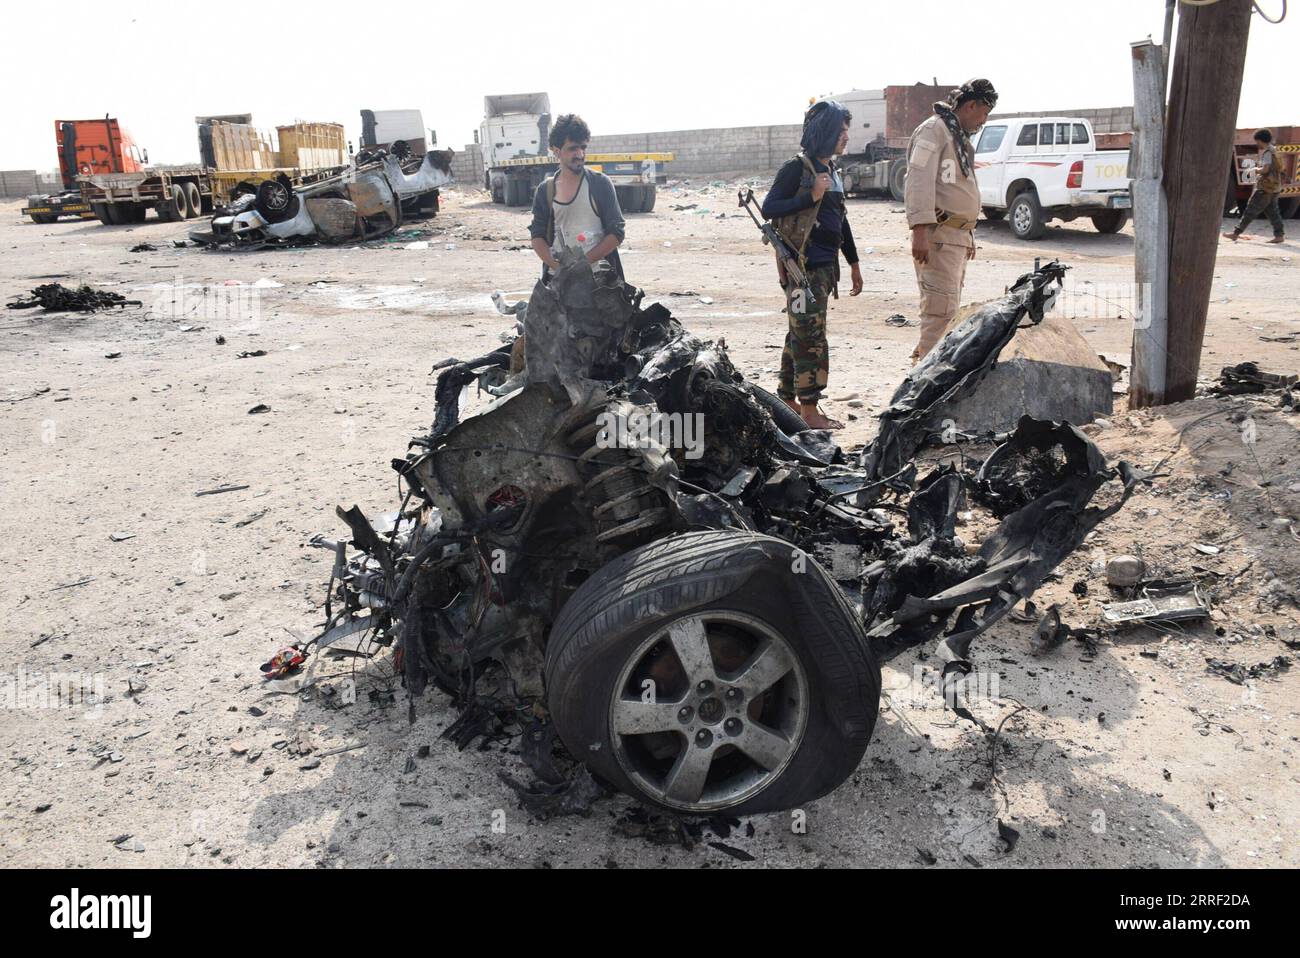 News Bilder des Tages 220325 -- ADEN, March 25, 2022 -- Security officers stand next to the wreckage of a car on a street of Aden, the southern port city of Yemen, on March 24, 2022. A deadly booby trap bomb attack in southern Yemen s Aden killed a high-ranking military commander of the Yemeni army and three bodyguards on Wednesday, a government official told Xinhua. Photo by /Xinhua YEMEN-ADEN-SENIOR COMMANDER-KILLED MuradxAbdo PUBLICATIONxNOTxINxCHN Stock Photo